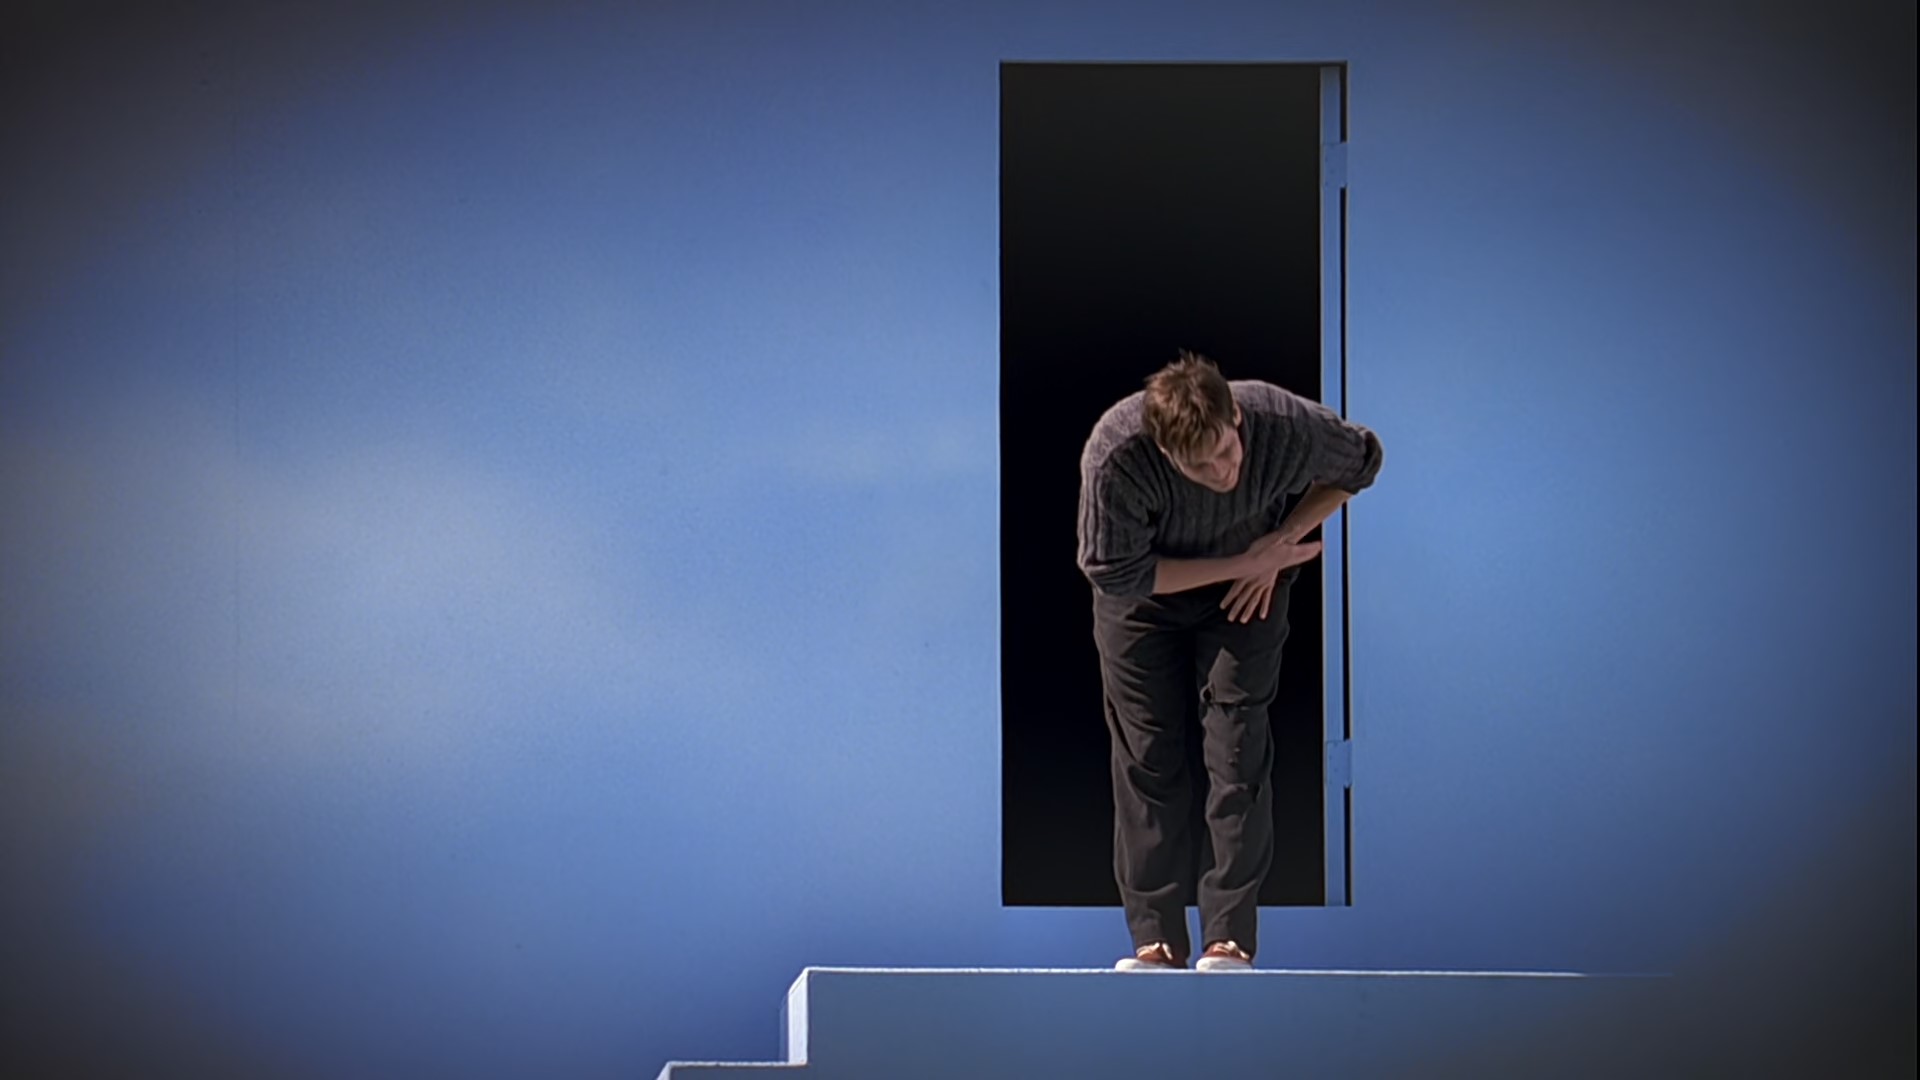 Truman Burbank steps out into the world in search of true freedom (Source - movie The Truman Show)